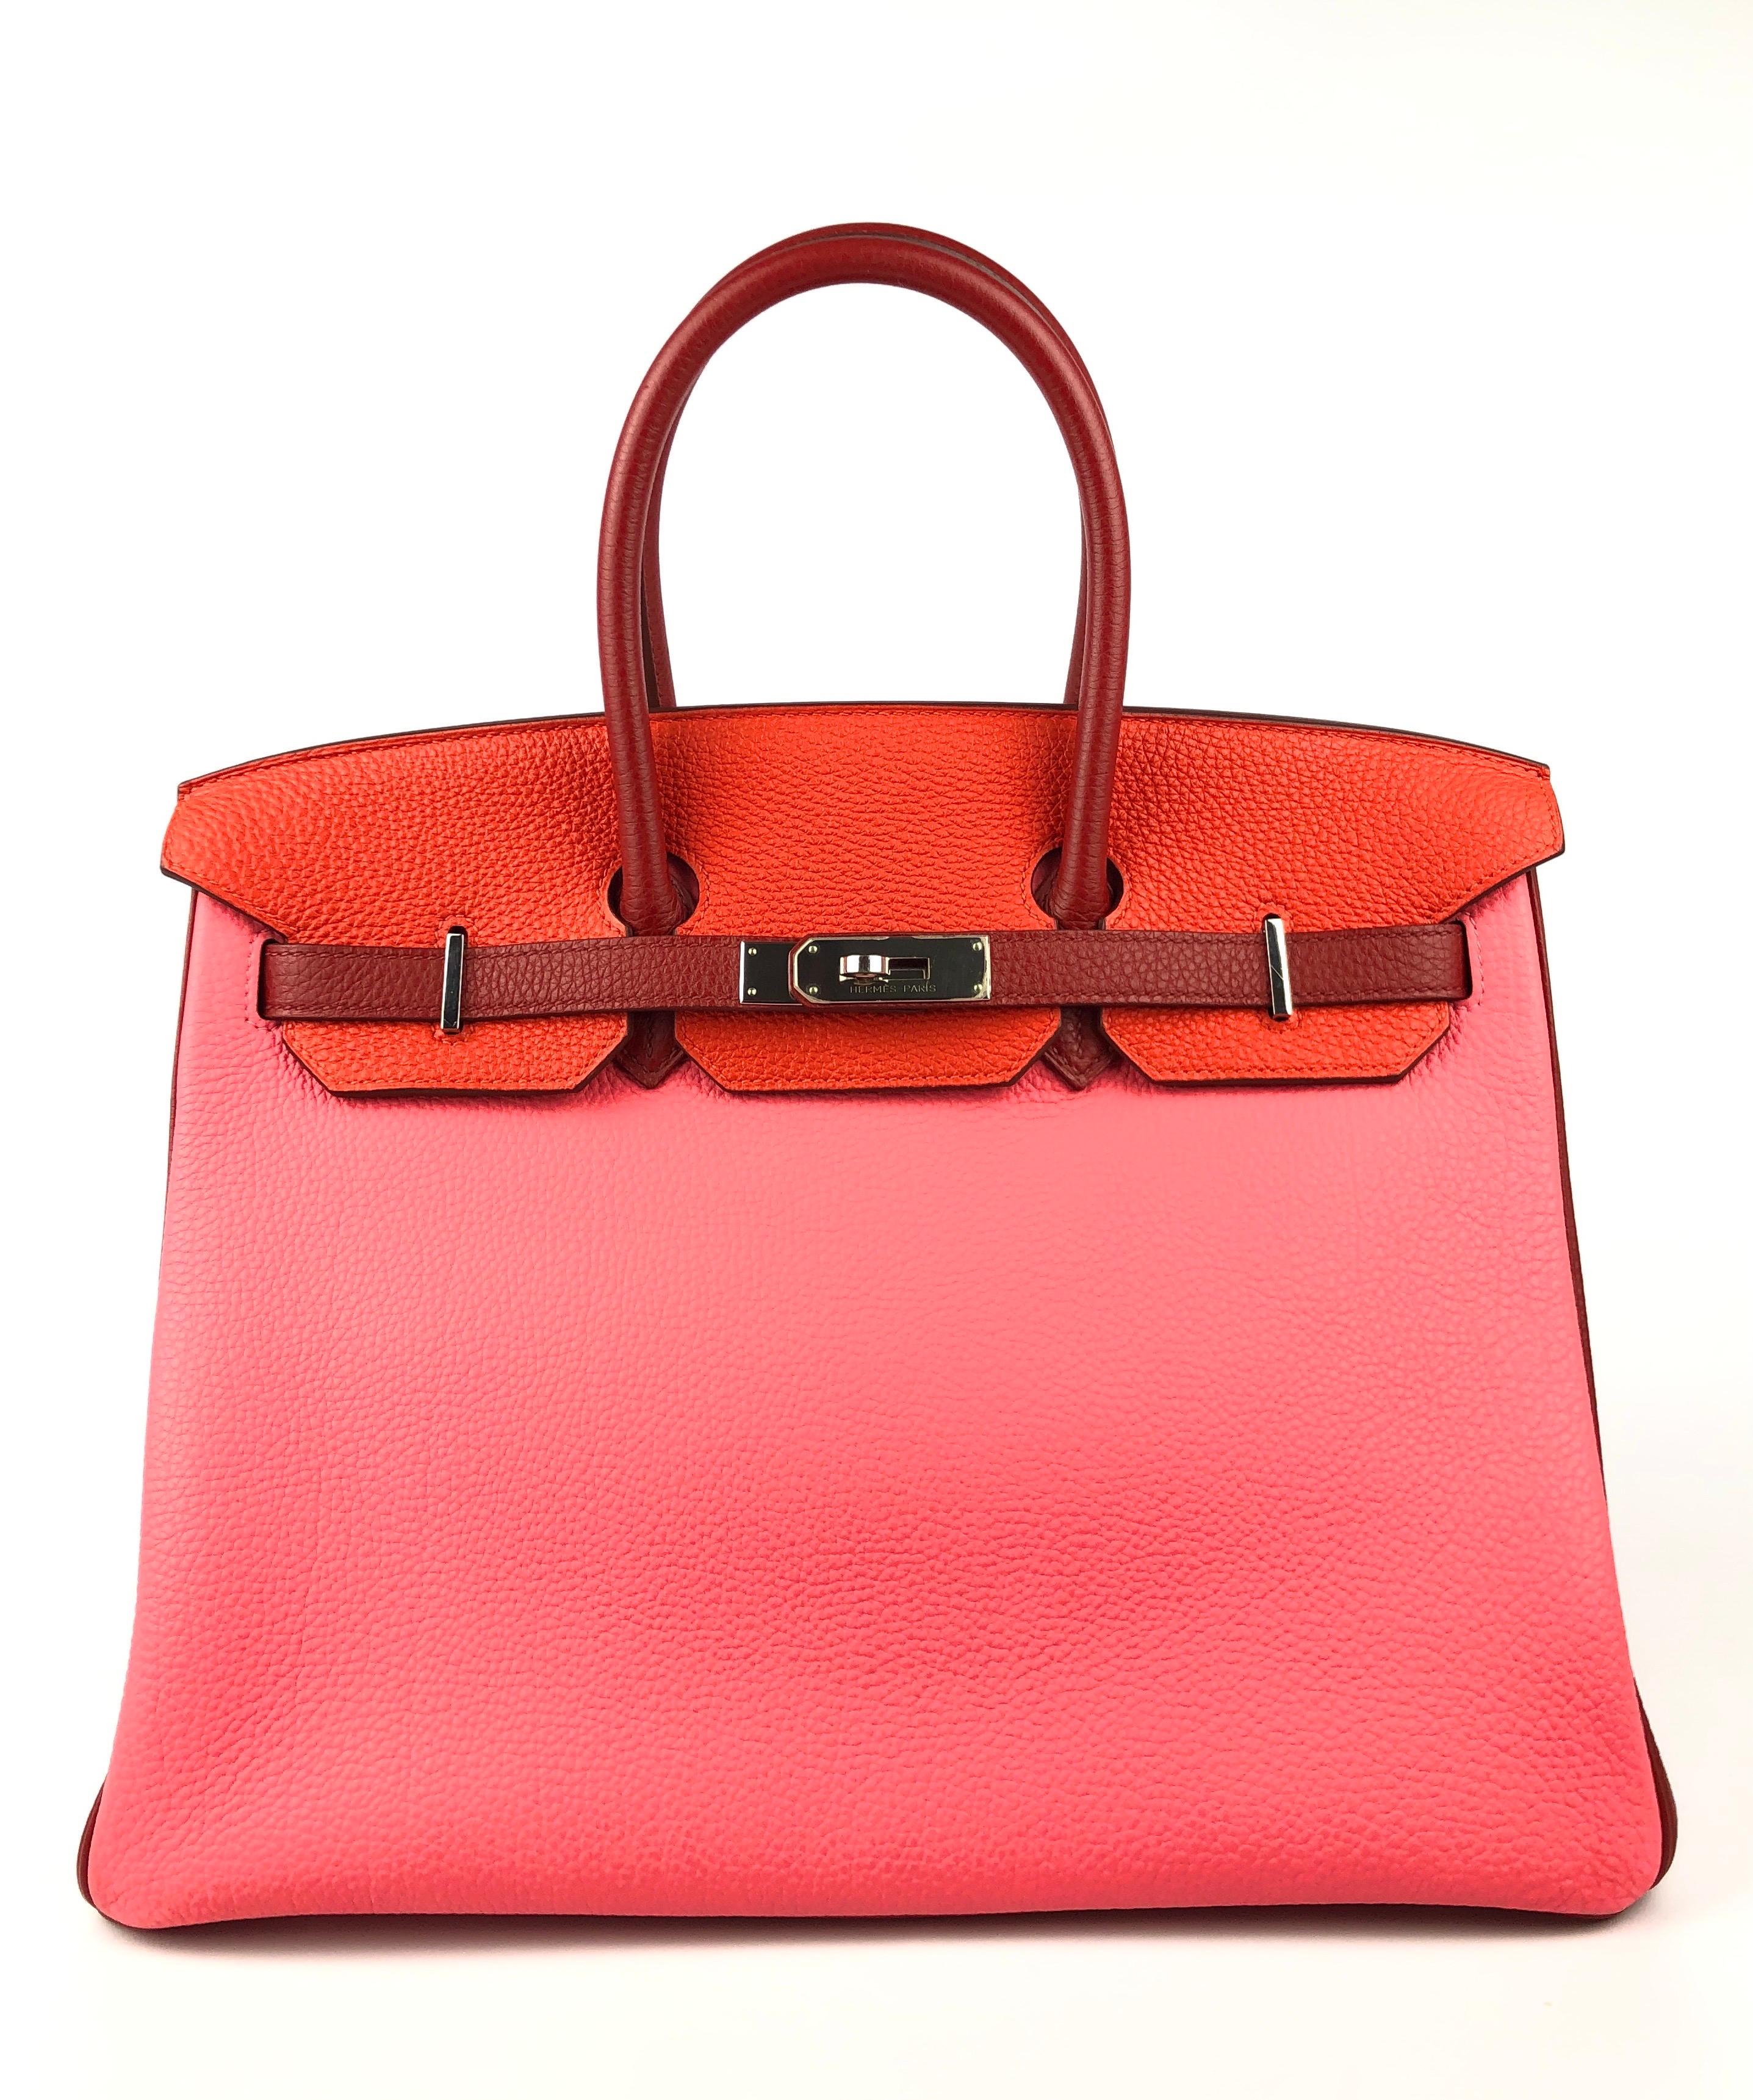 10F1 RARE HERMES BIRKIN 35 HSS SPECIAL ORDER TRI COLOR ROSE LIPSTICK RED CAPUCINE PALLADIUM HARDWARE. Excellent condition, Plastic on hardware excellent corners and structure. 

Shop with Confidence from Lux Addicts. Authenticity Guaranteed. 